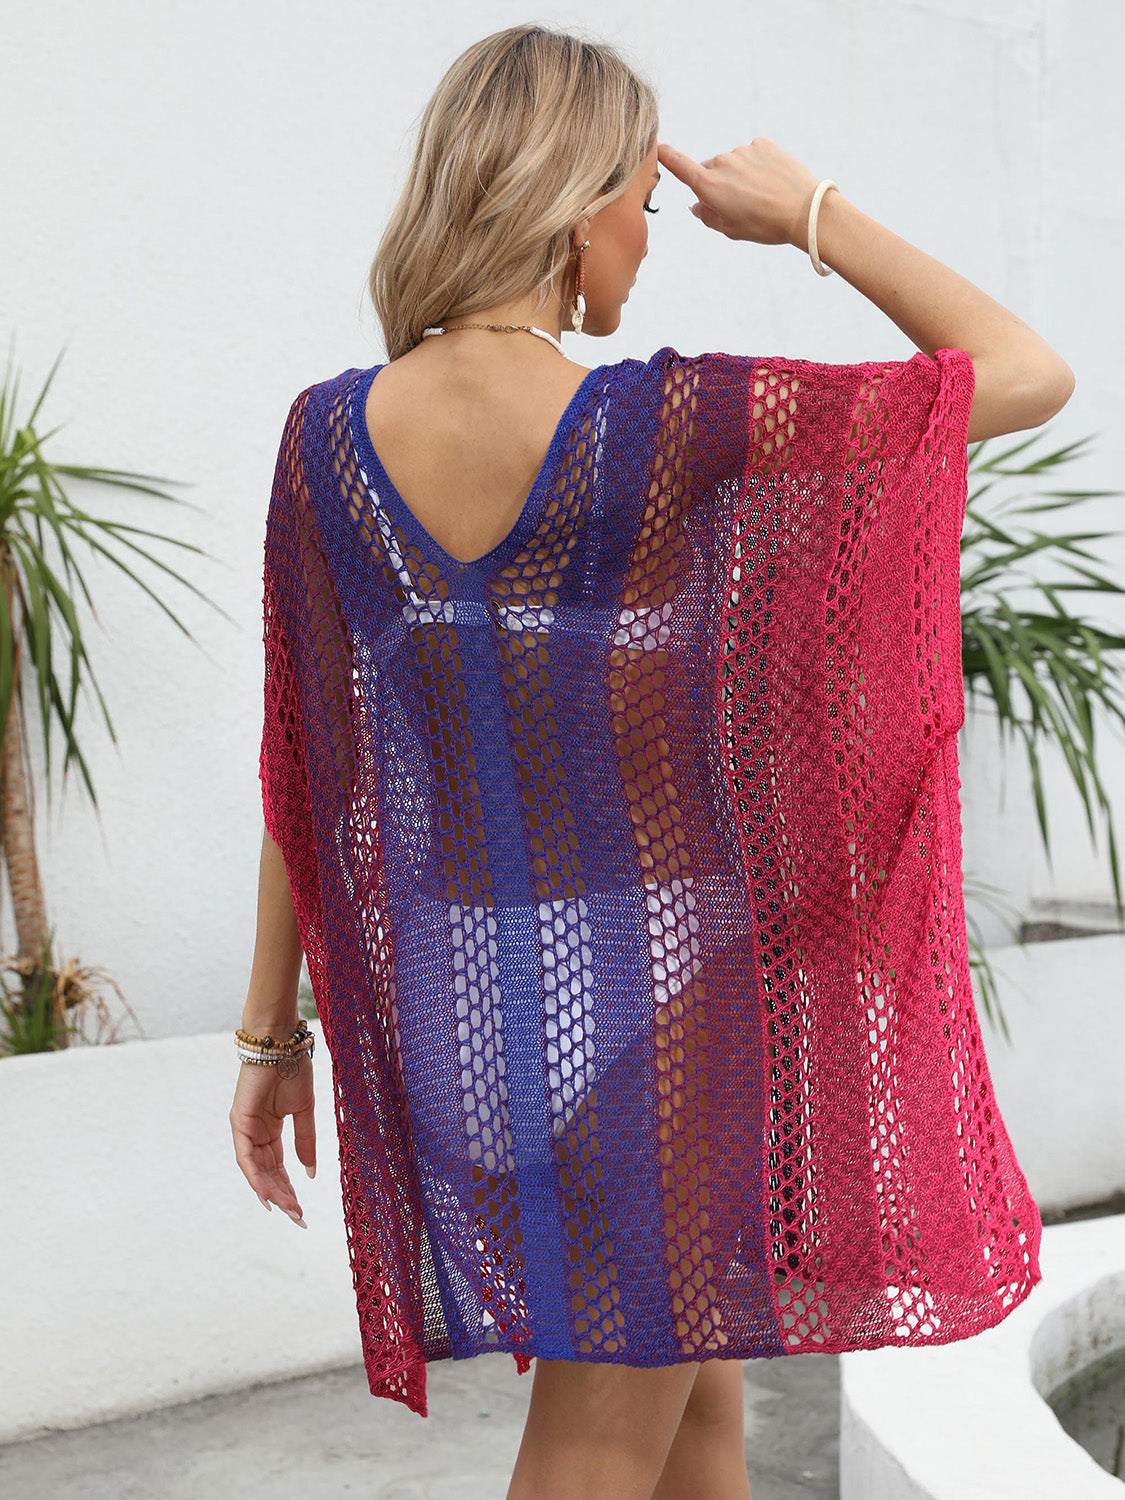 Openwork Contrast V-Neck Cover-Up apparel & accessories